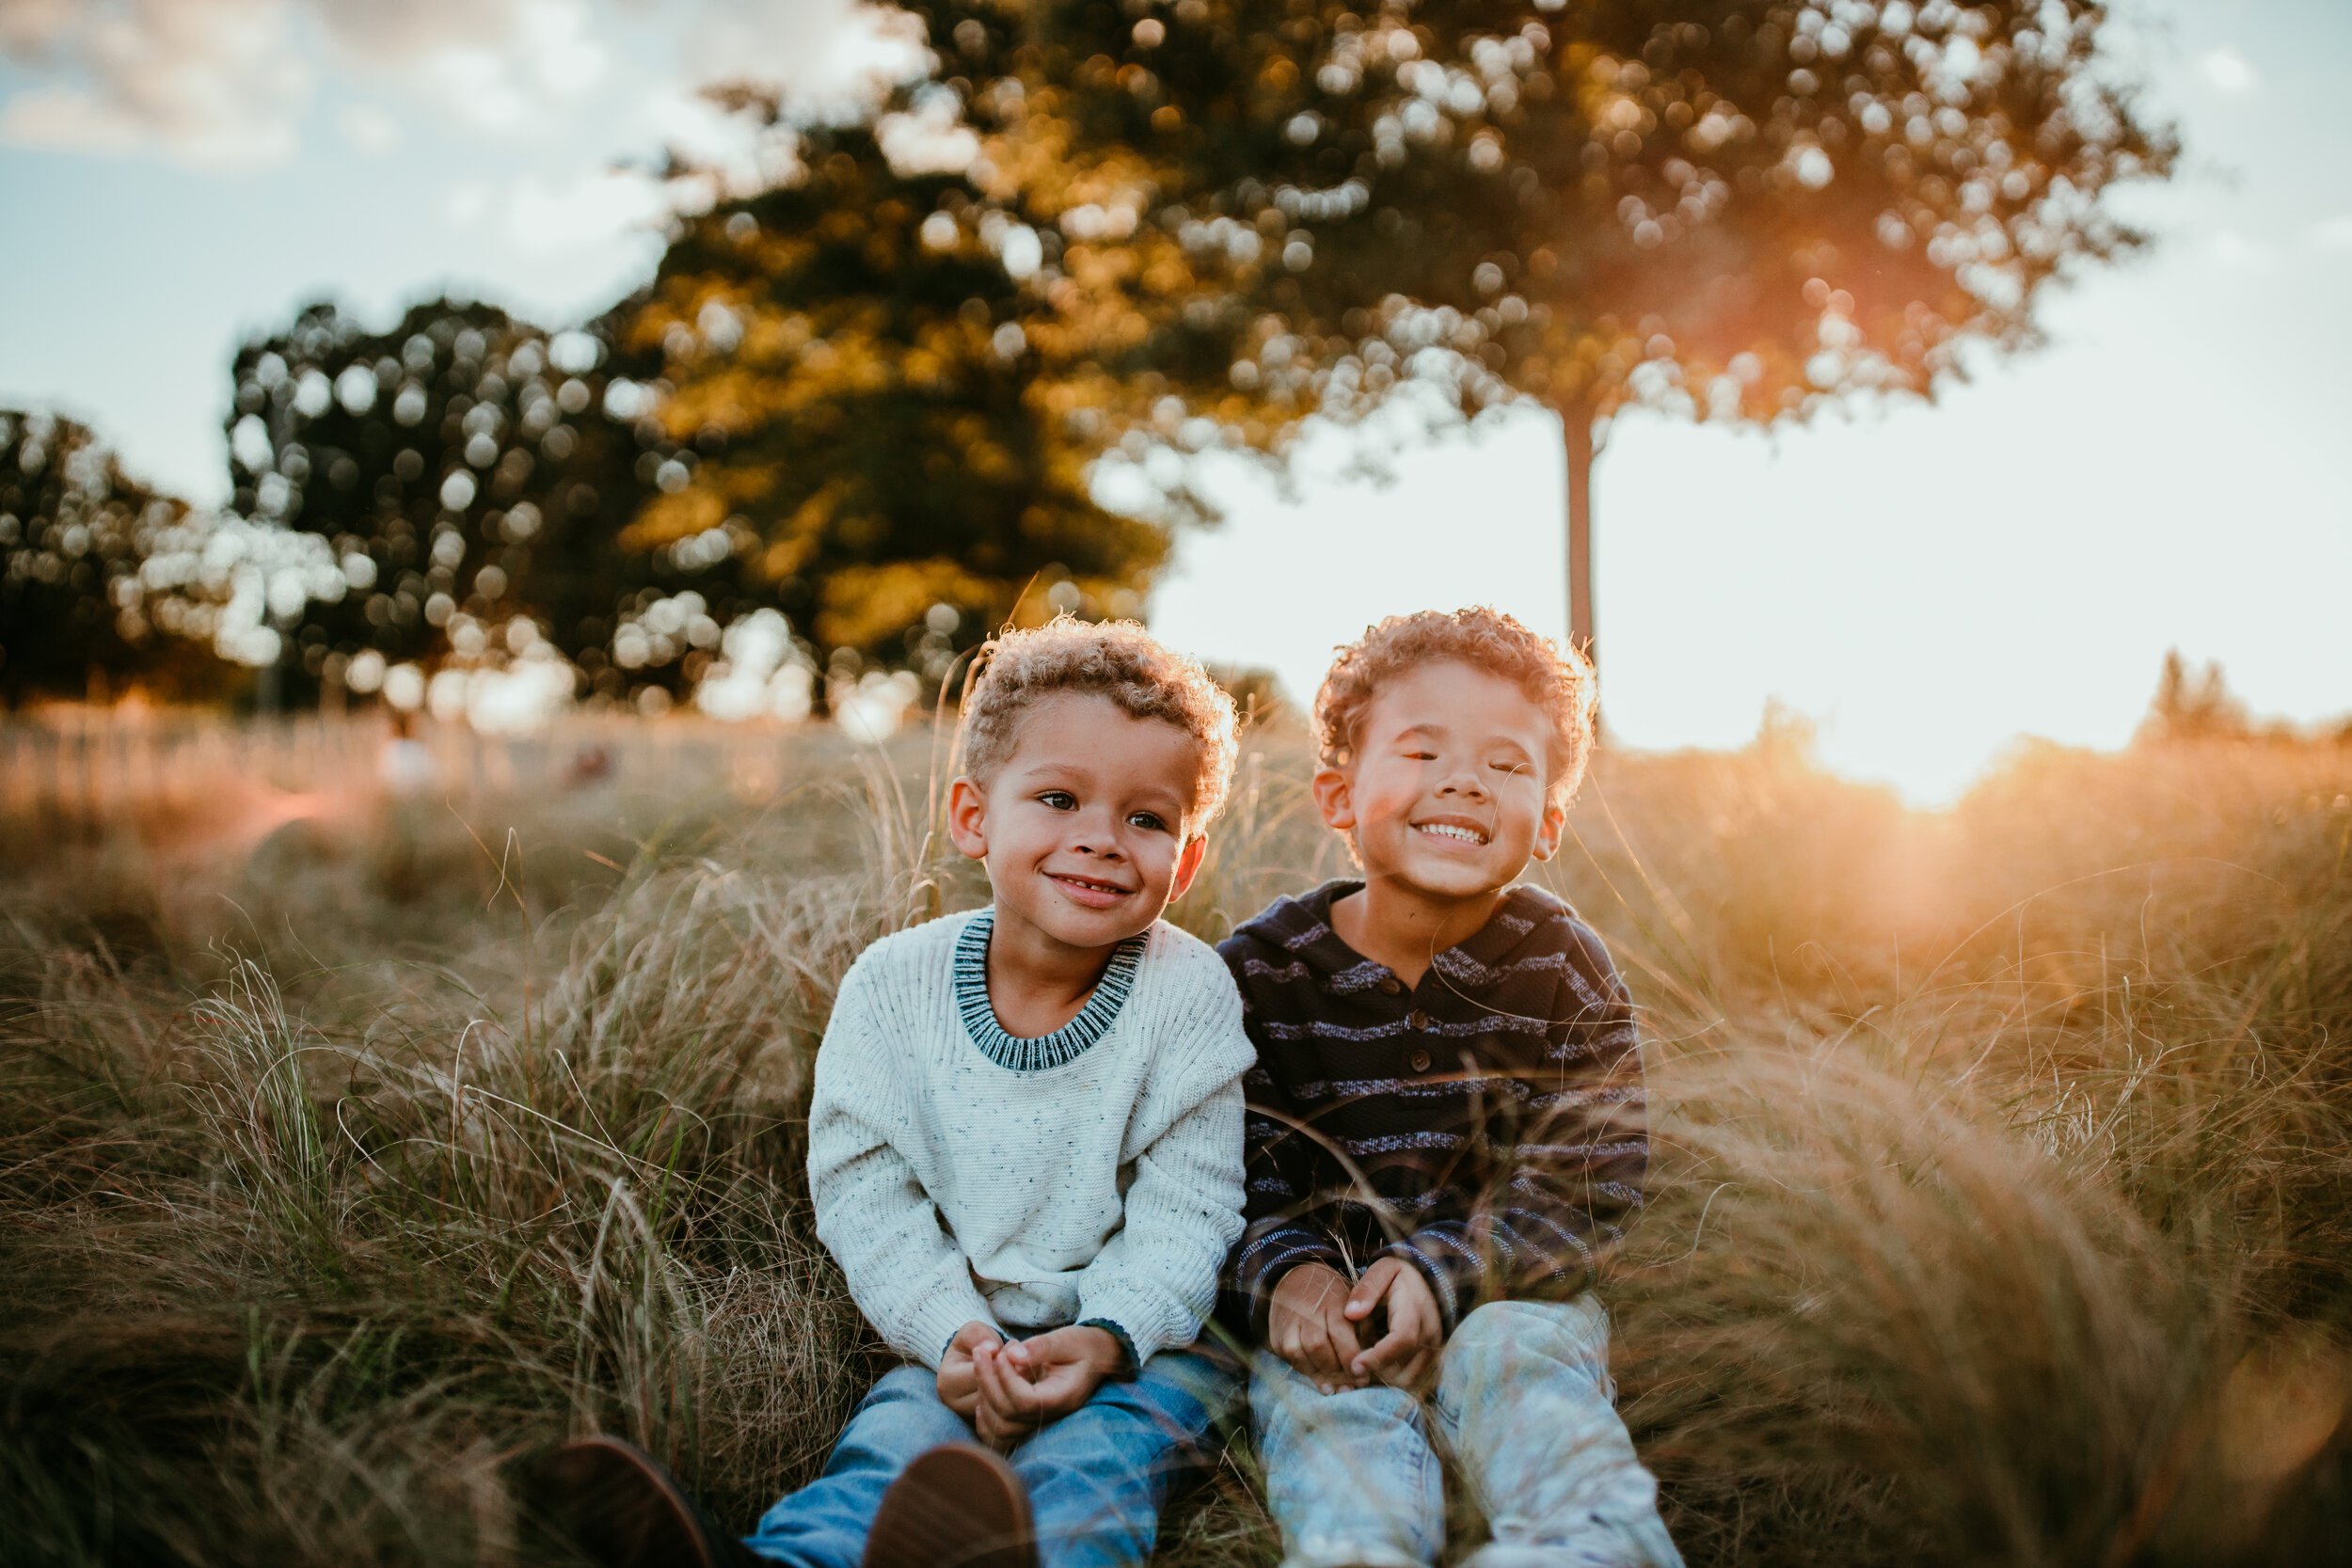 brothers sit together in field smiling at the camera with sunset in the background